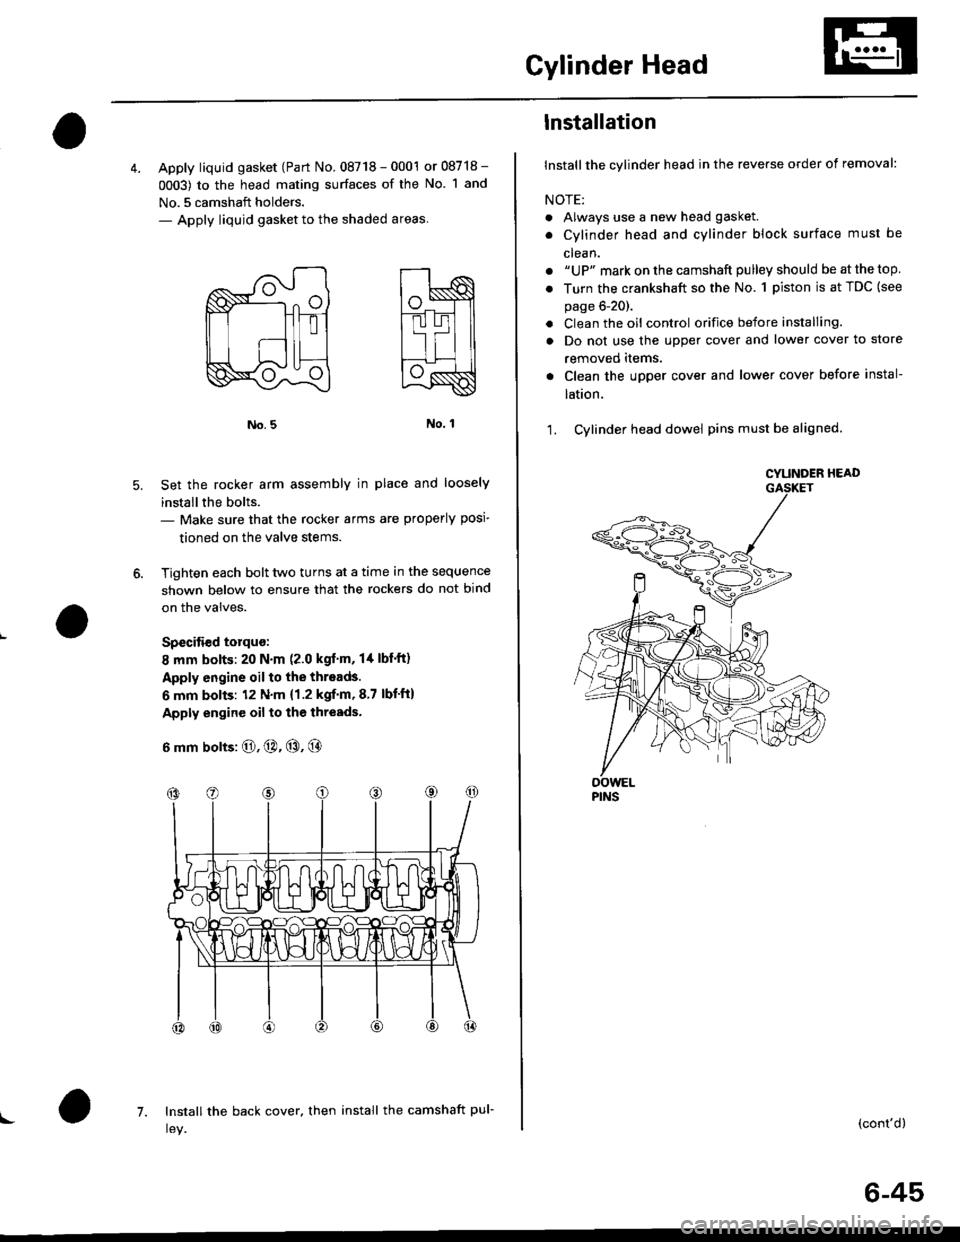 HONDA CIVIC 1998 6.G Service Manual Cylinder Head
4. Apply liquid gasket (Part No. 08718 - 0001 or 08718 -
0003) to the head mating surfaces of the No. 1 and
No.5 camshaft holders.- Apply liquid gasket to the shaded areas
Set the rocker